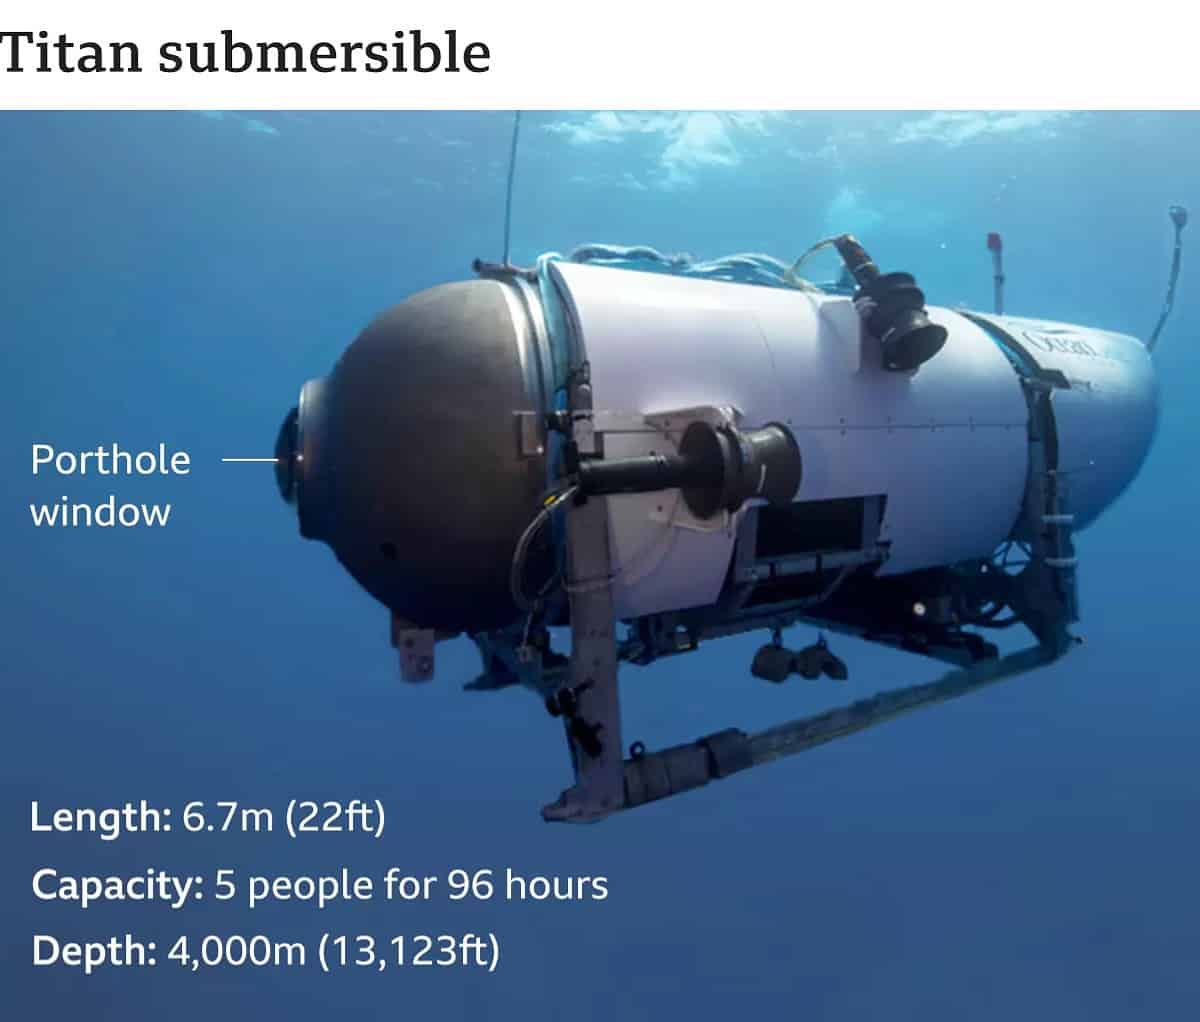 Canada launches probe into Titan submersible implosion that killed 5